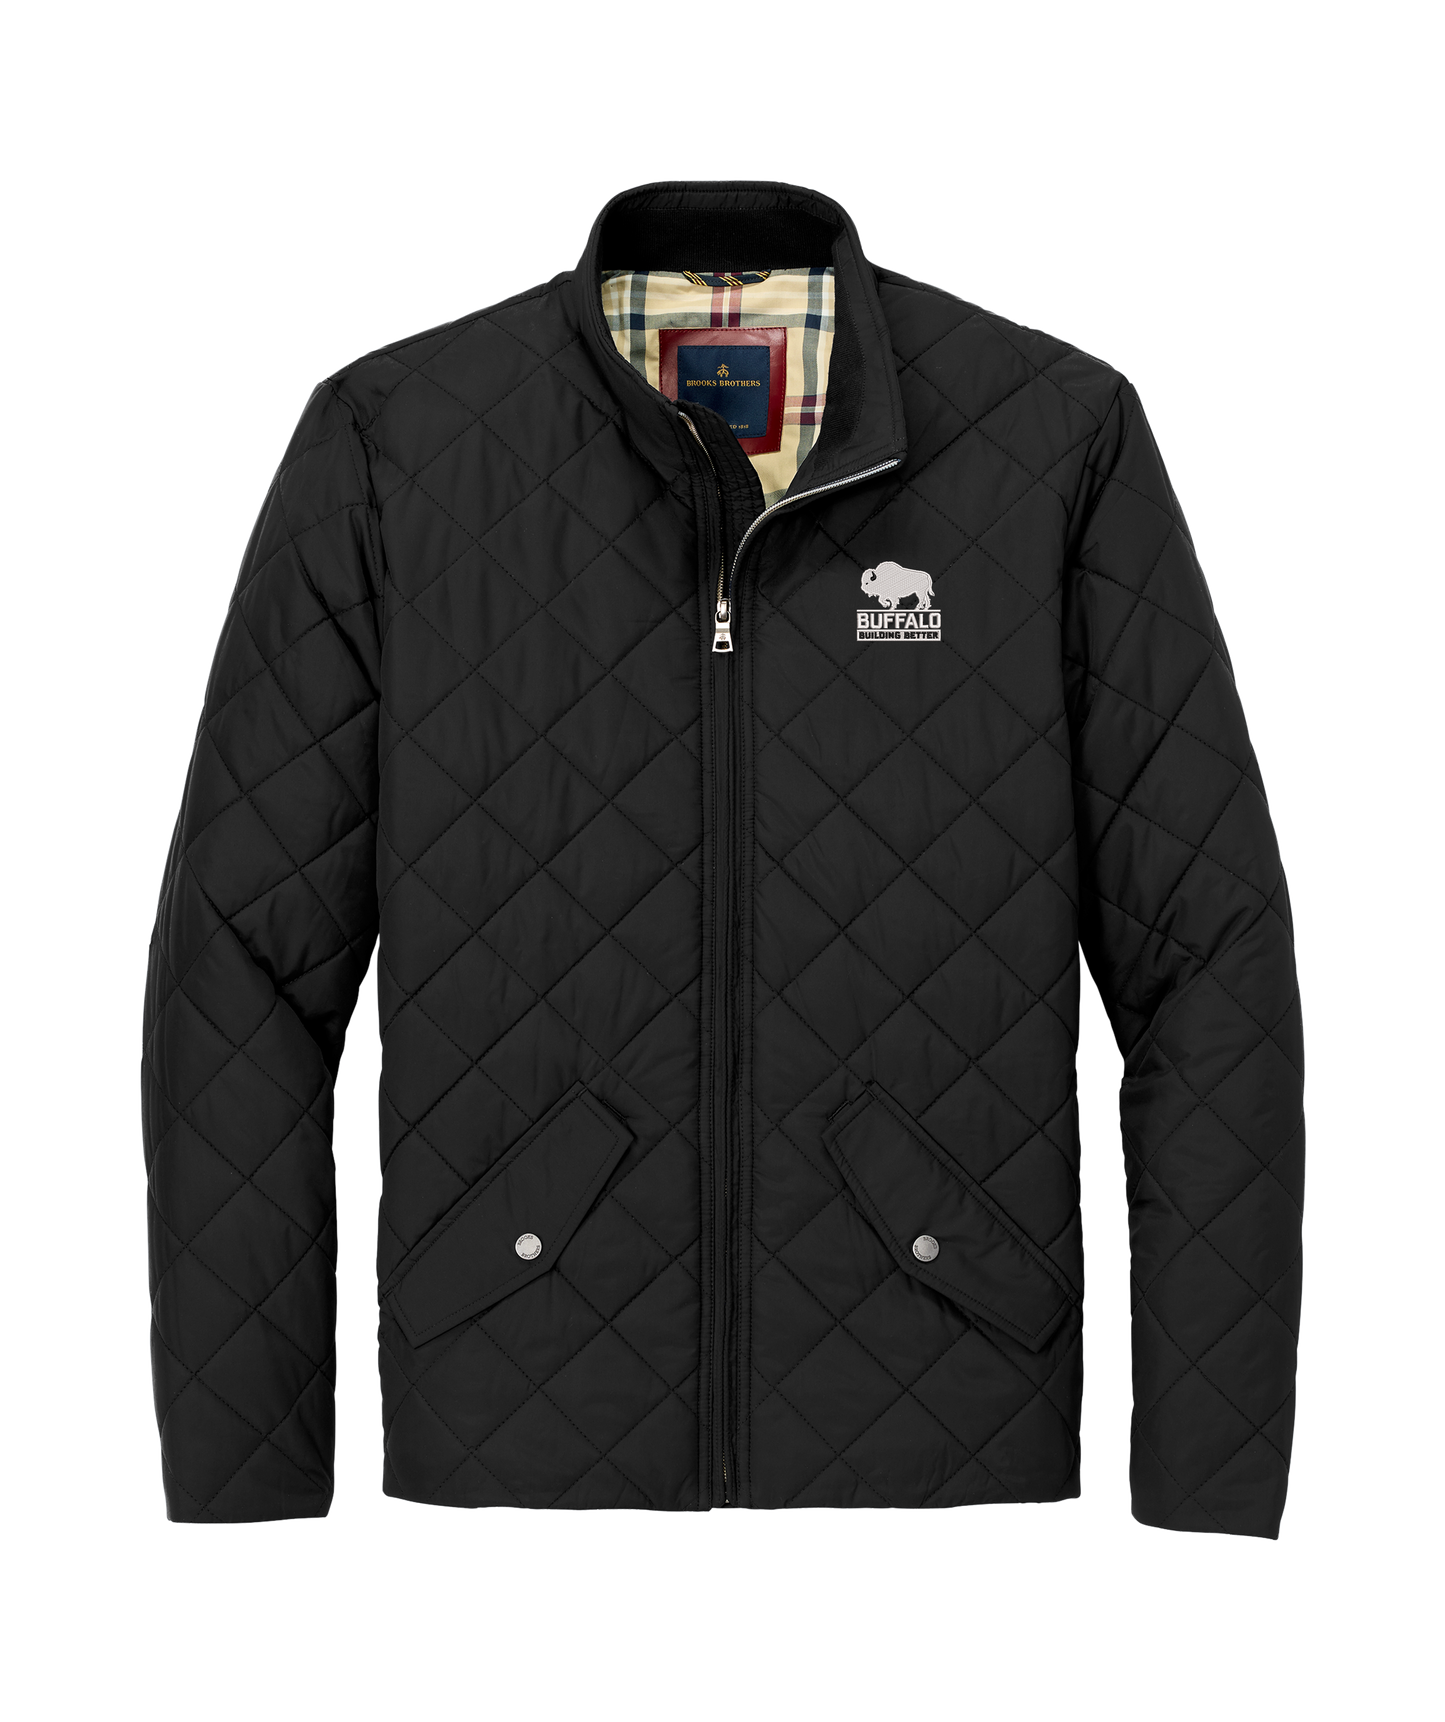 Brooks Brothers Quilted Jacket